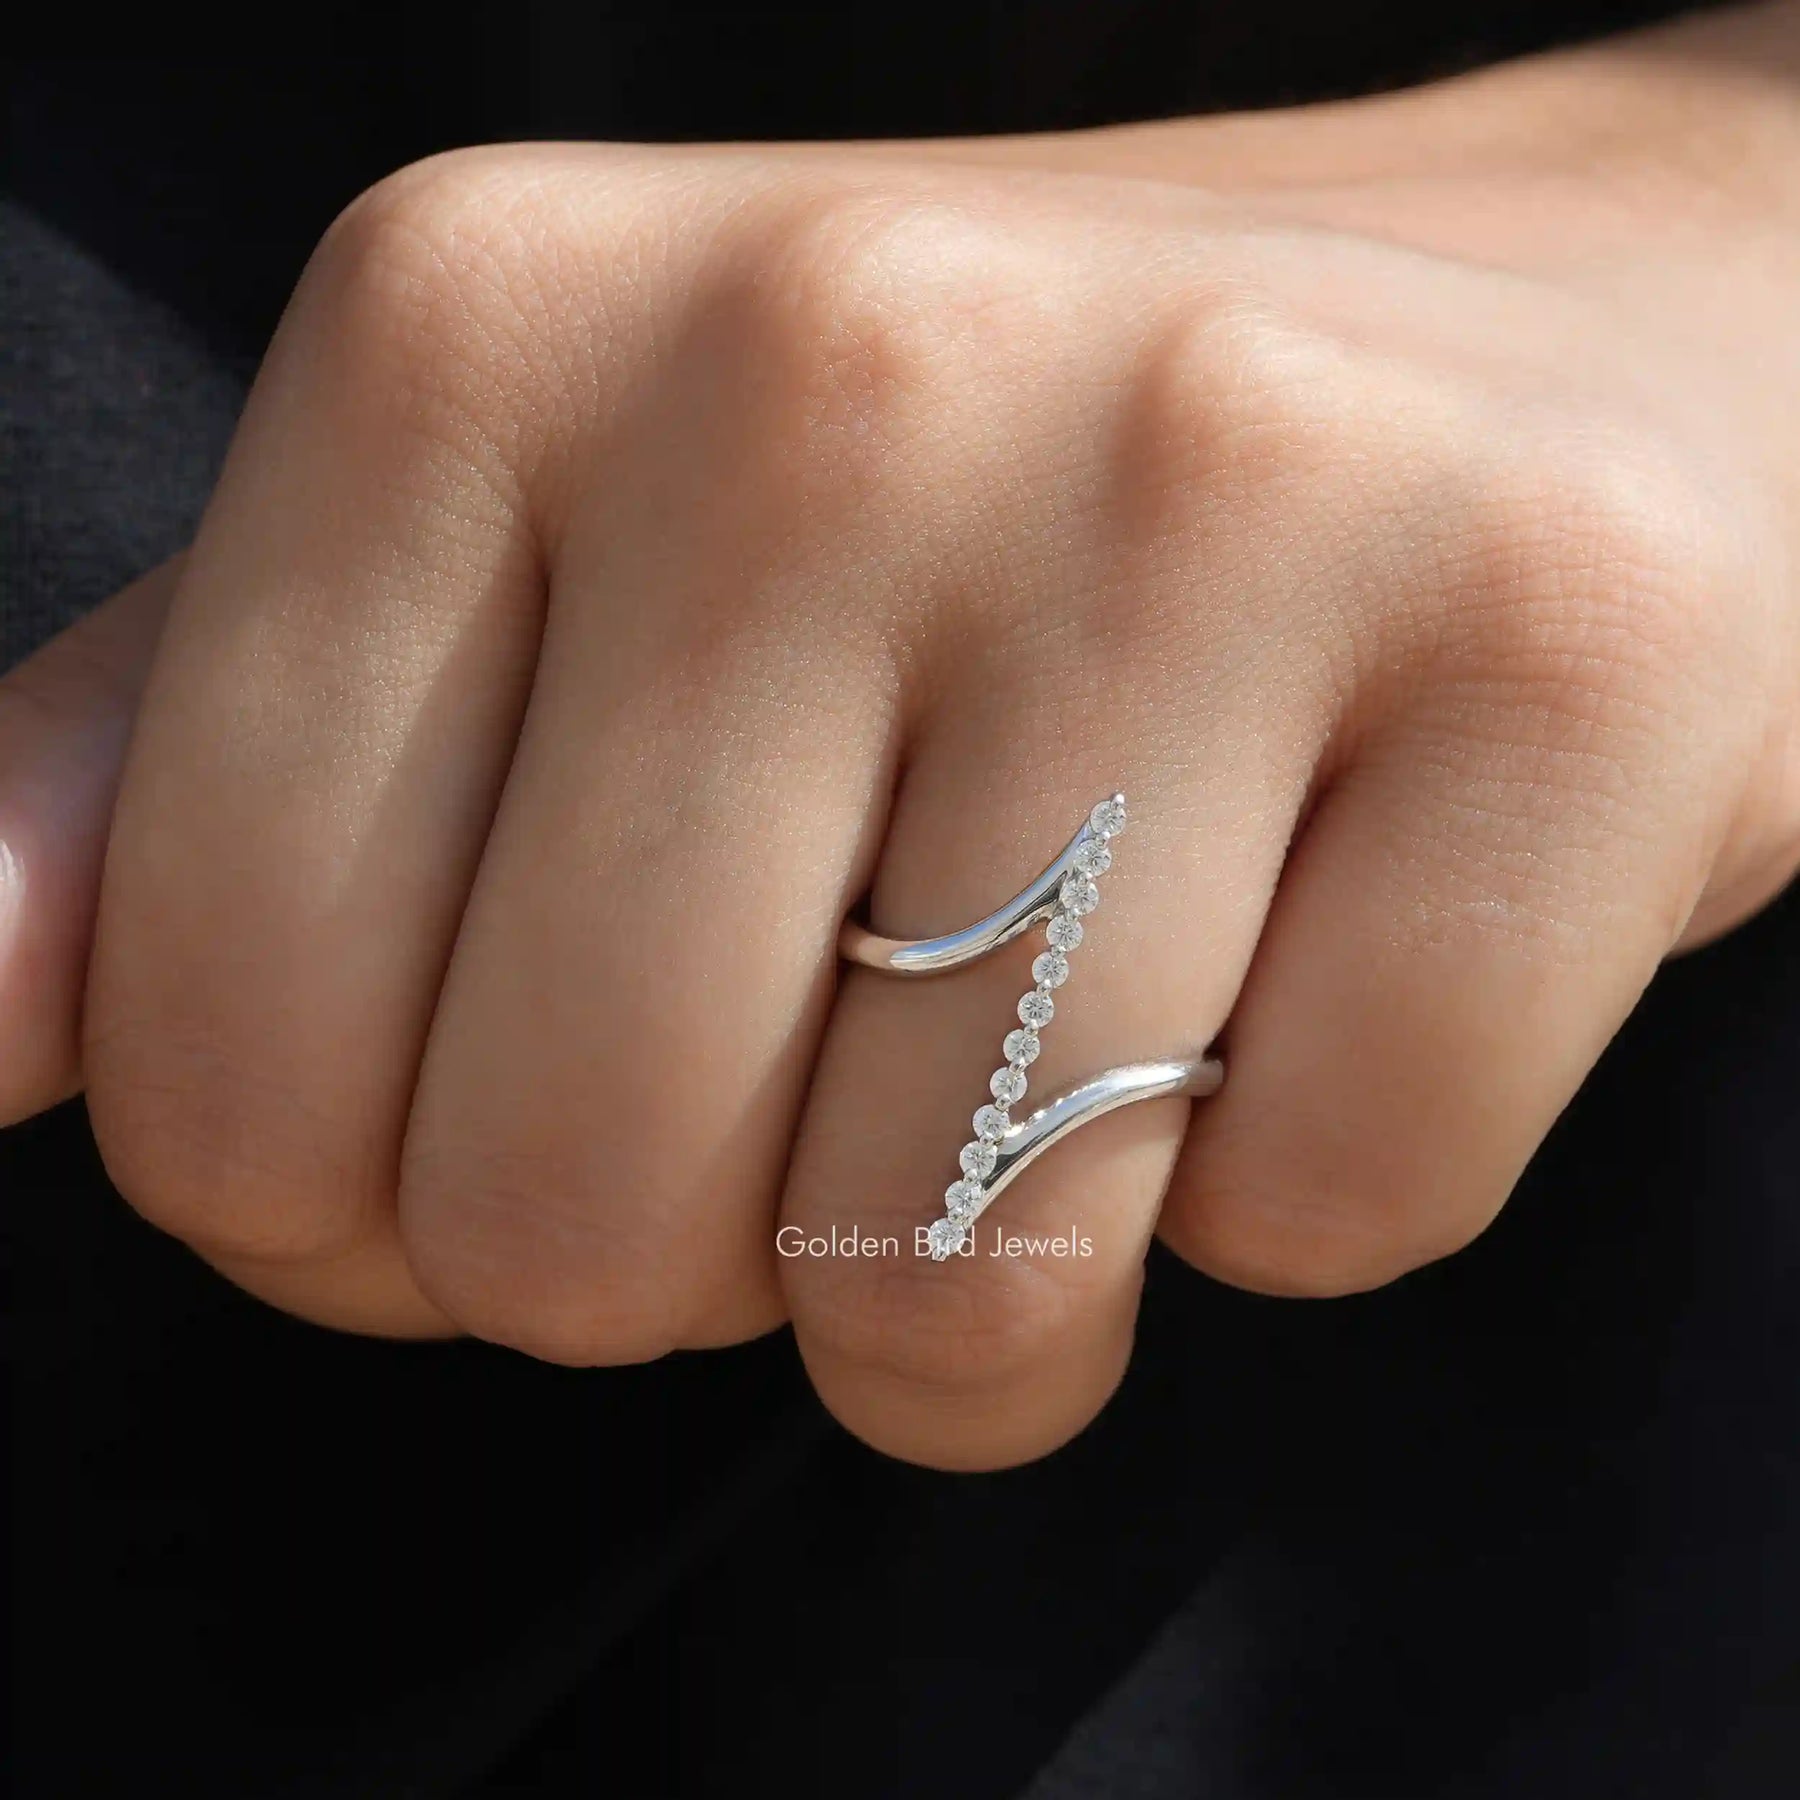 [This ring crafted with vertical bar style design set in round cut moissanite stones]